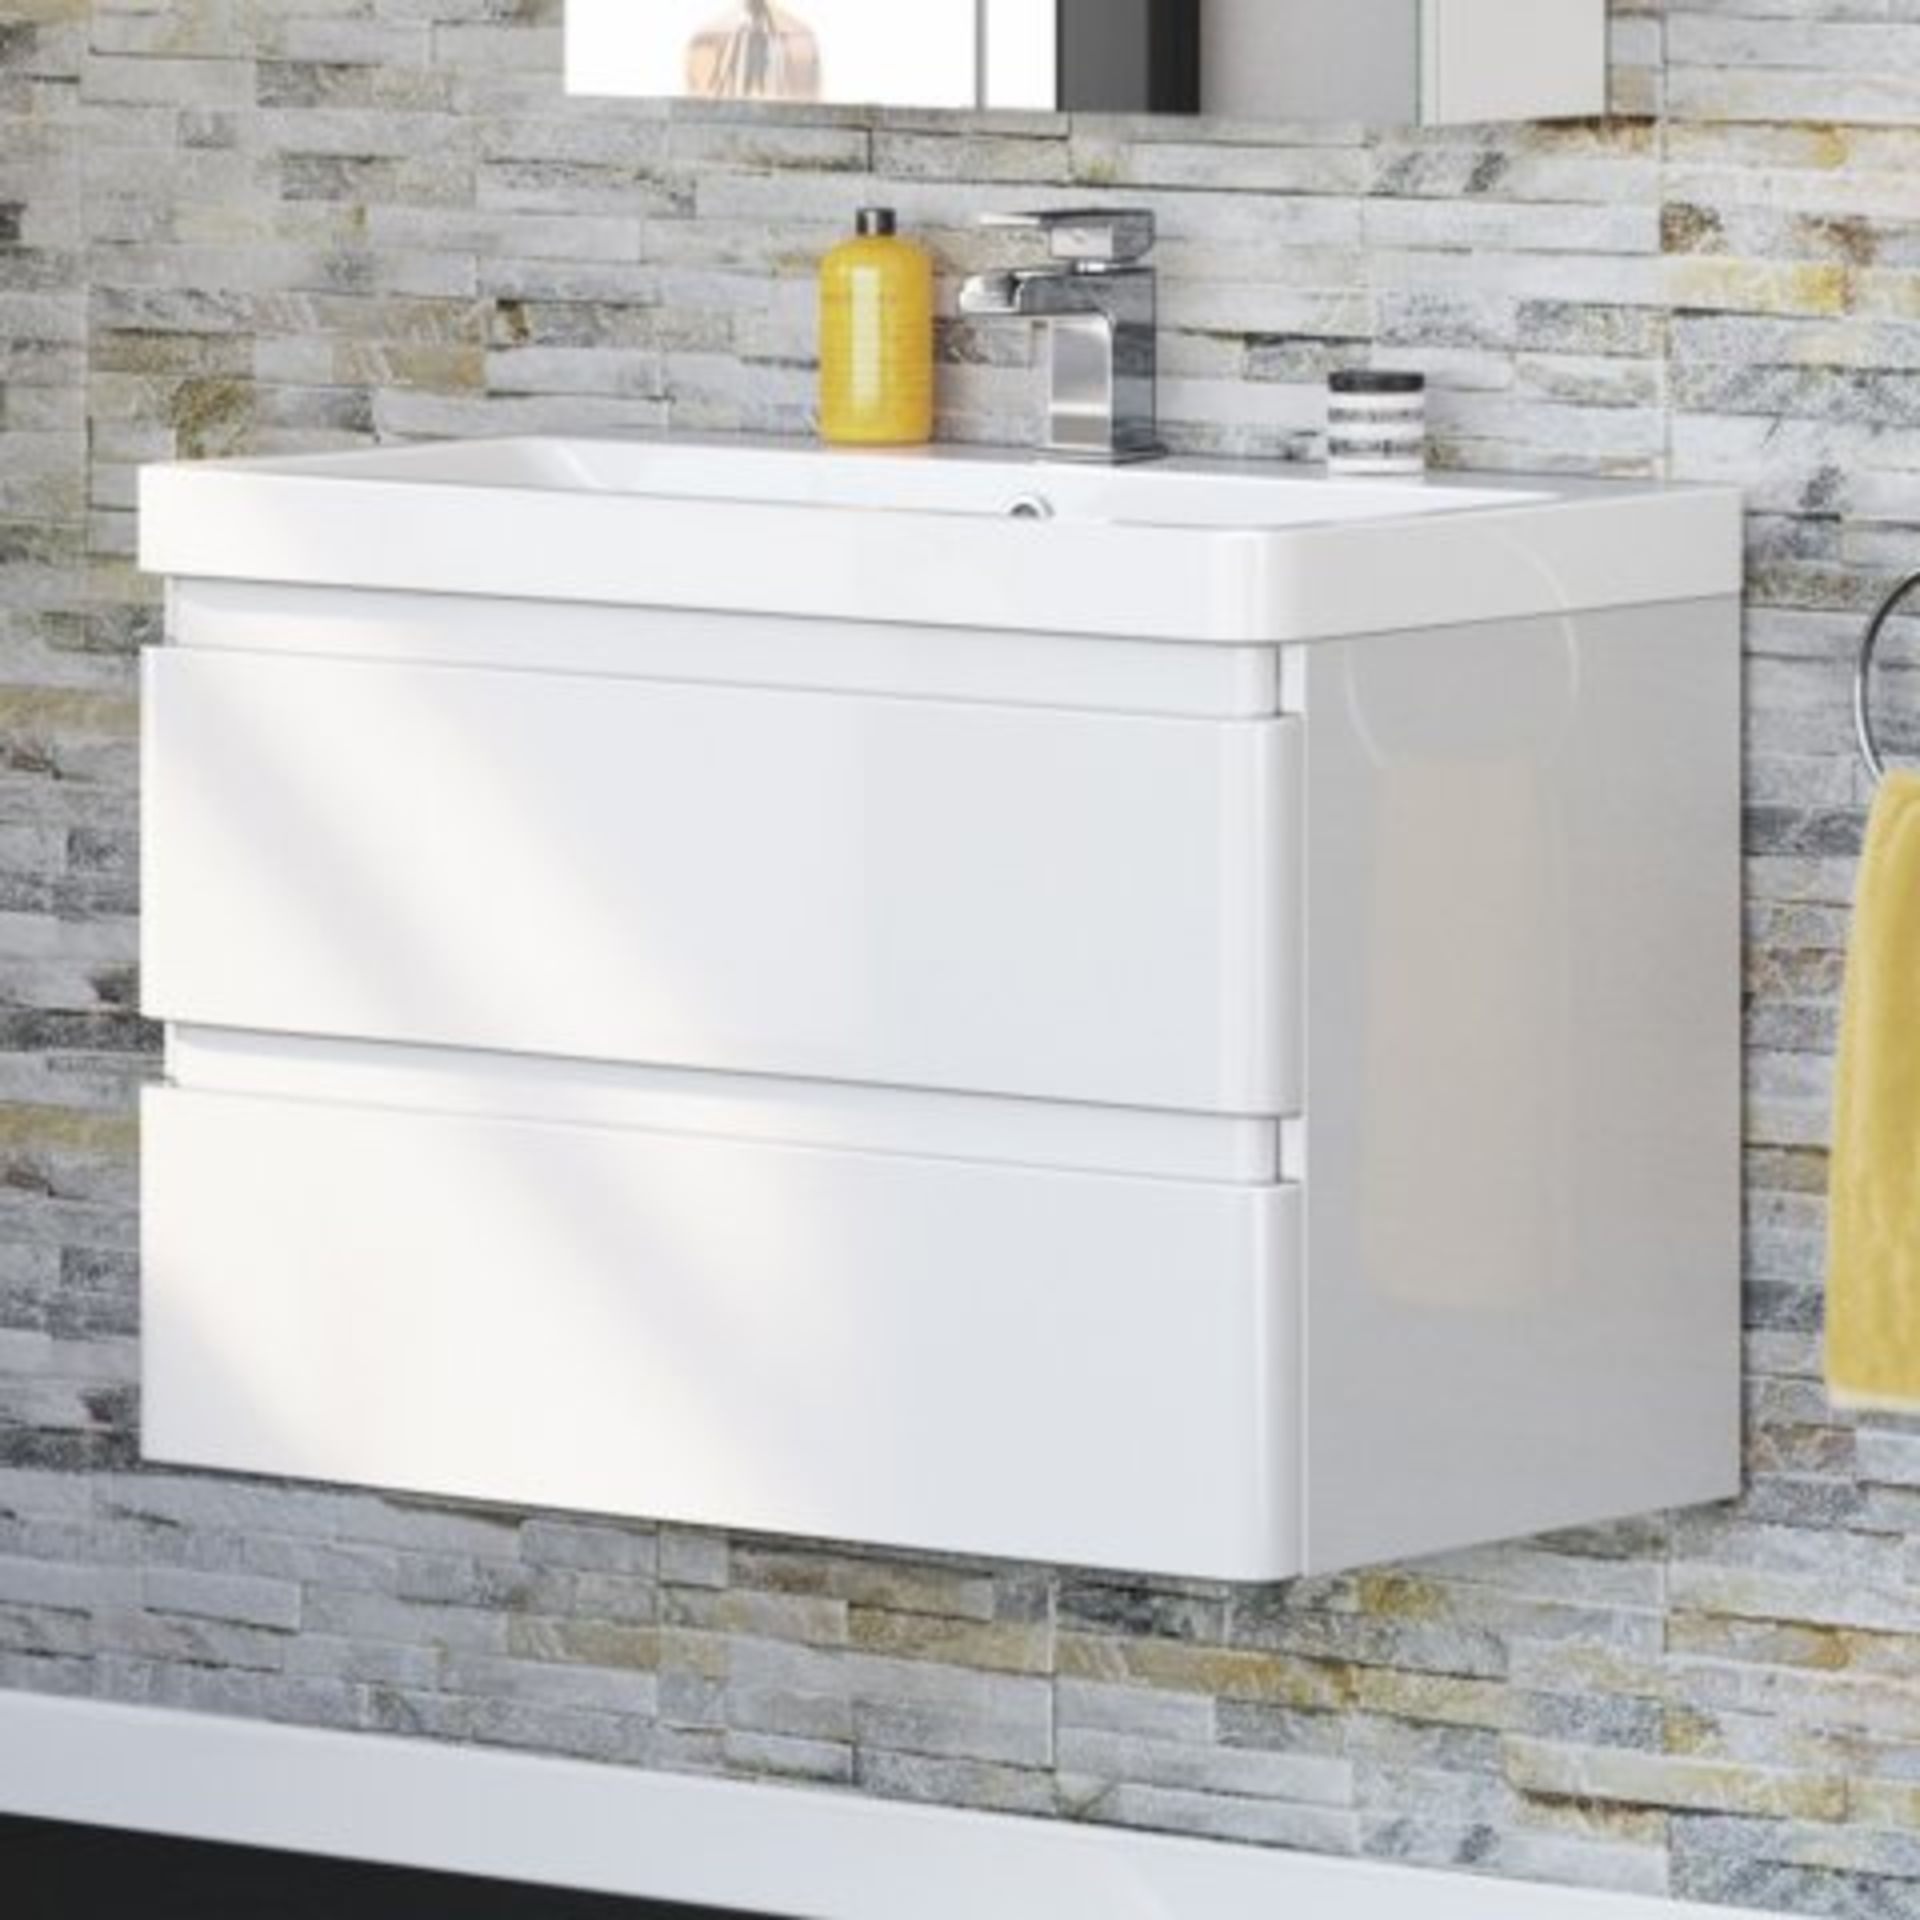 (I25) 800mm Denver II Gloss White Built In Basin Drawer Unit - Wall Hung. RRP £599.99. COMES